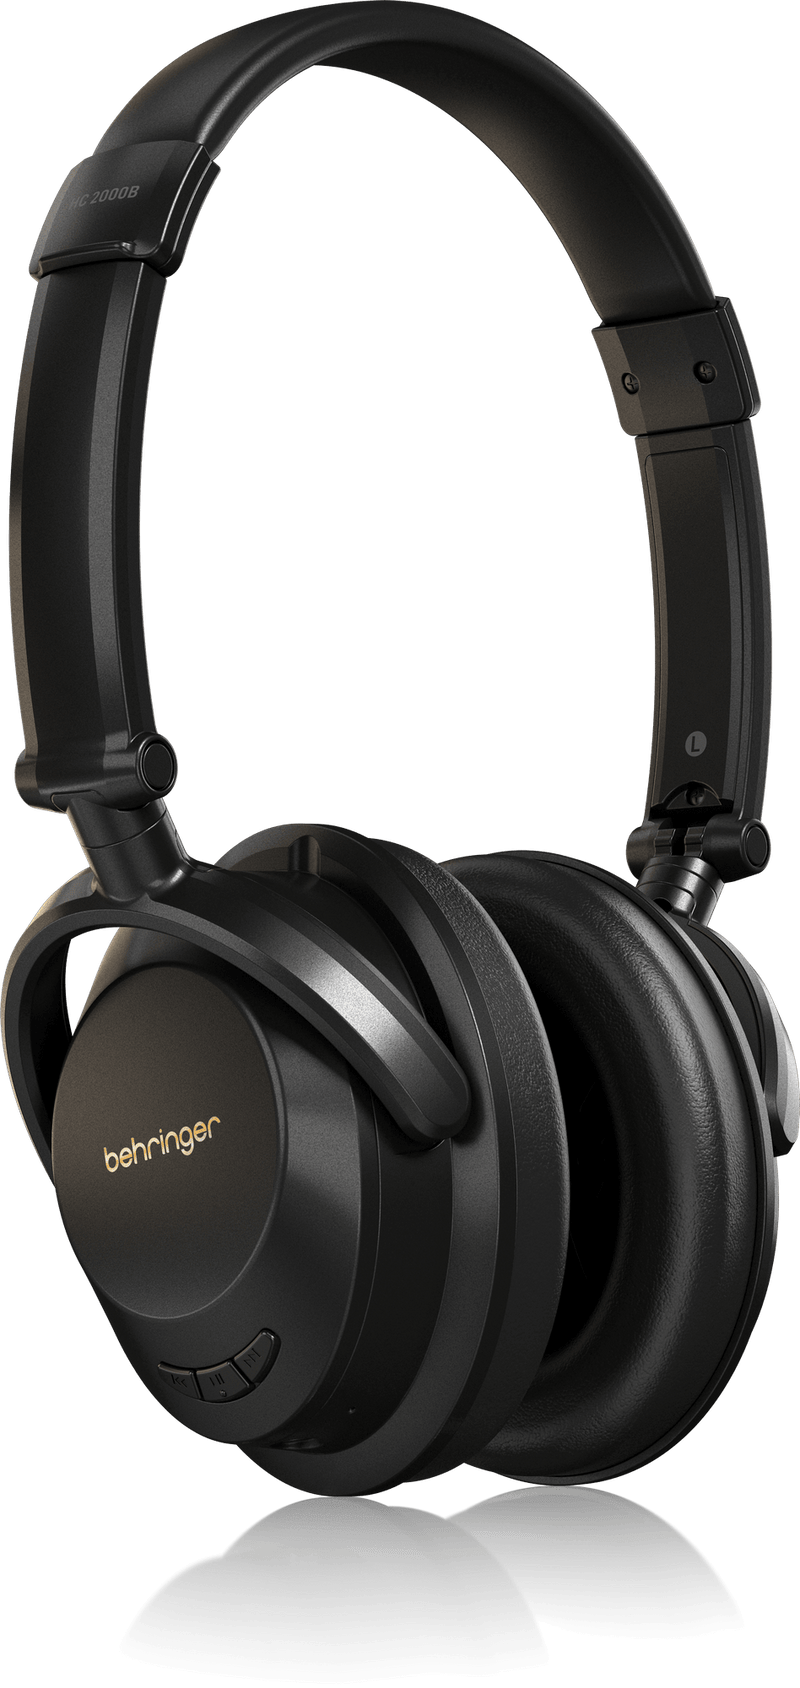 -20% OFF Behringer HC-2000B Studio-Quality Wireless Headphones with Bluetooth* Connectivity OPEN BOX